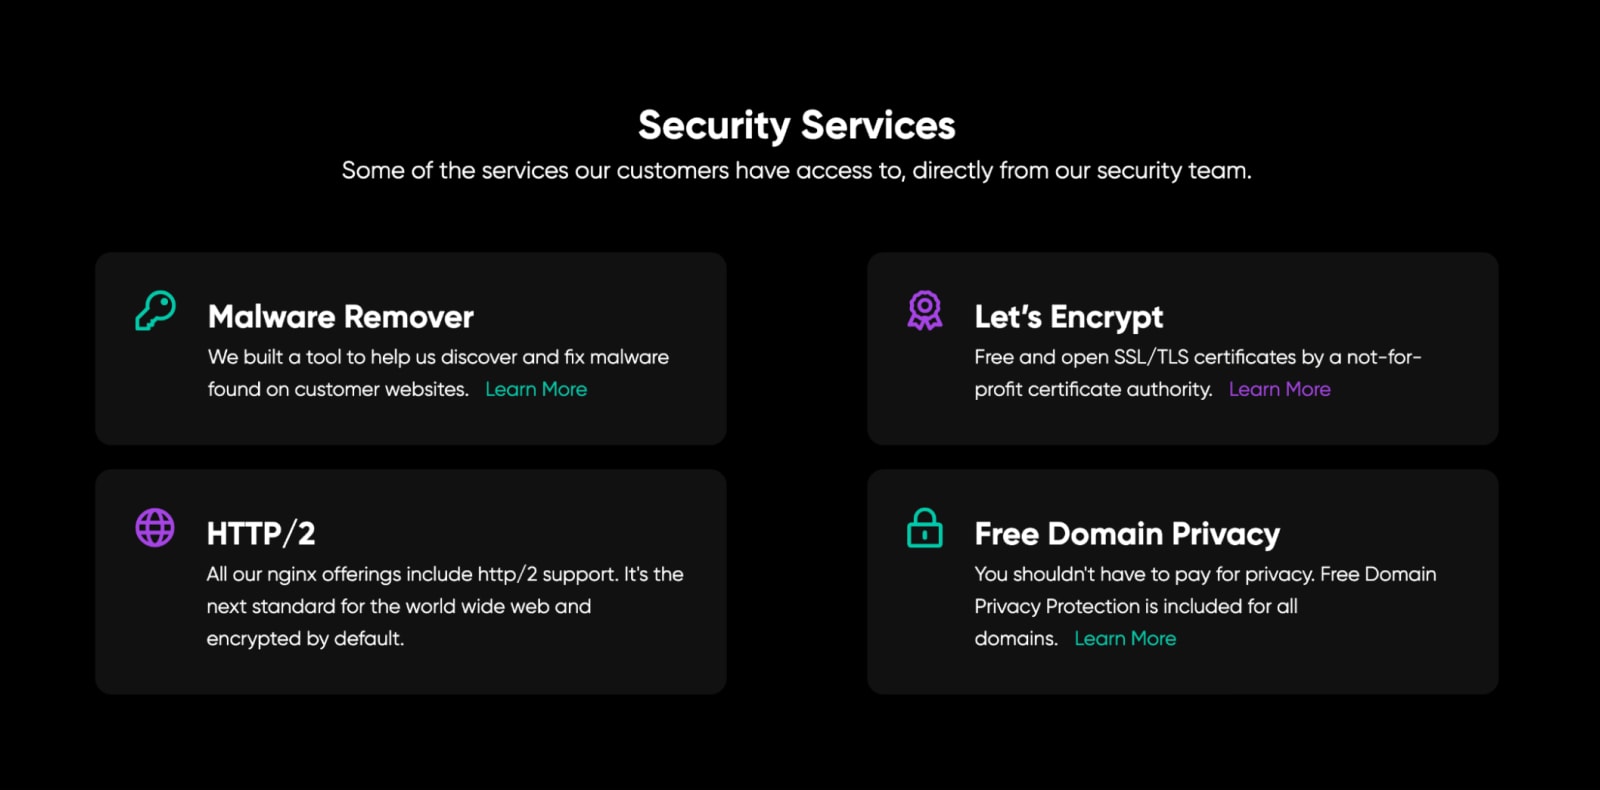 security services available direct from our security team: malware remover, let's encrypt, HTTP/2, free domain privacy